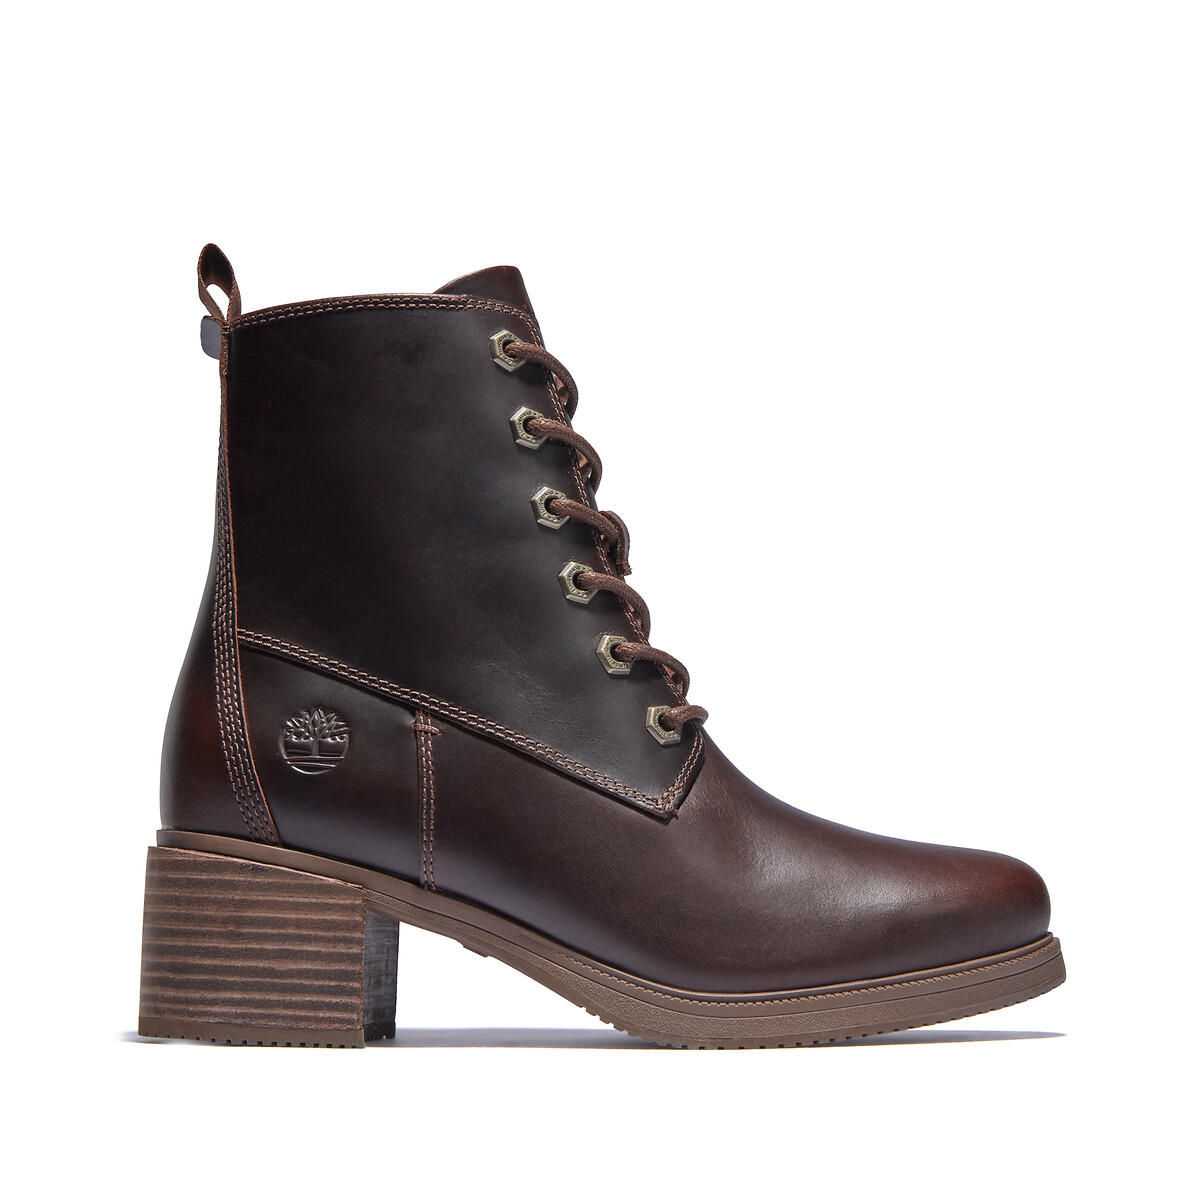 Dalston vibe bootie w ankle boots in leather, brown, Timberland | La ...